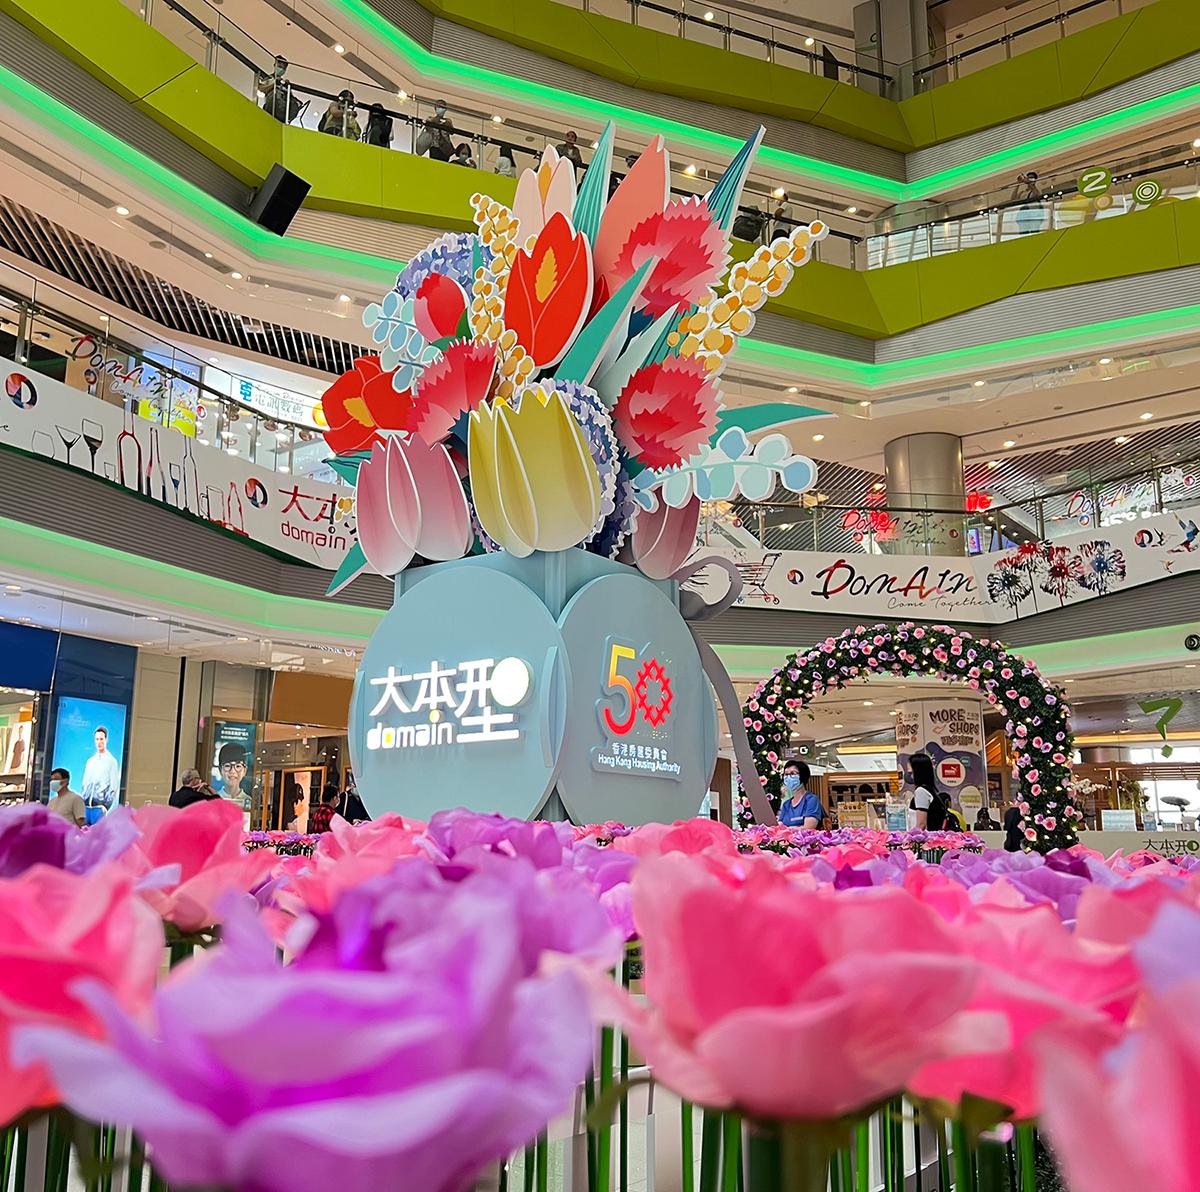 The Hong Kong Housing Authority will launch a promotion in its regional shopping centre at Domain, Yau Tong, for Mother's Day to express gratitude to mothers and boost patronage. A floral garden for Mother's Day is set up in its atrium for photo opportunities.